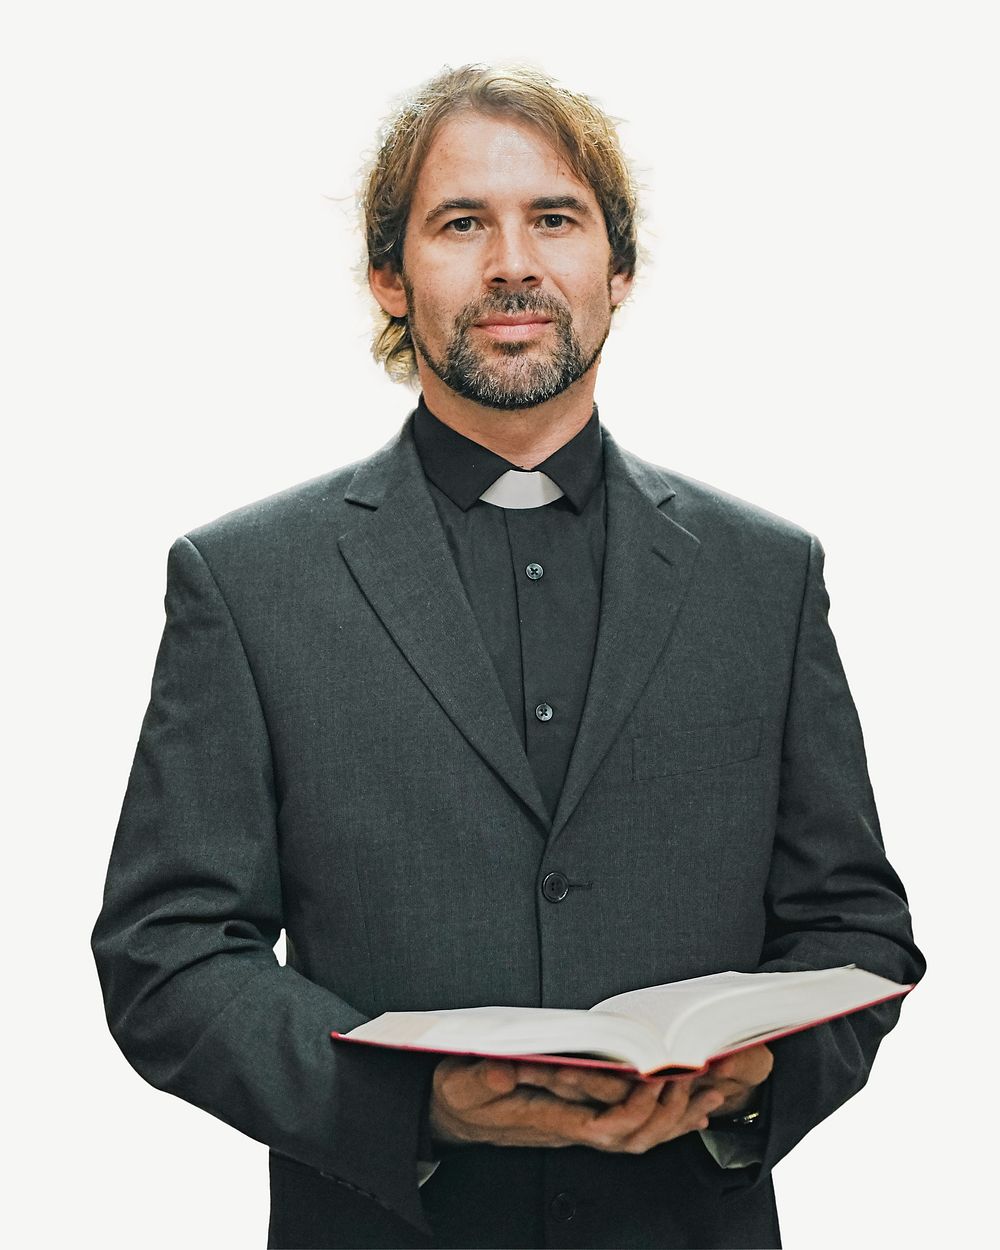 Christian priest collage element psd